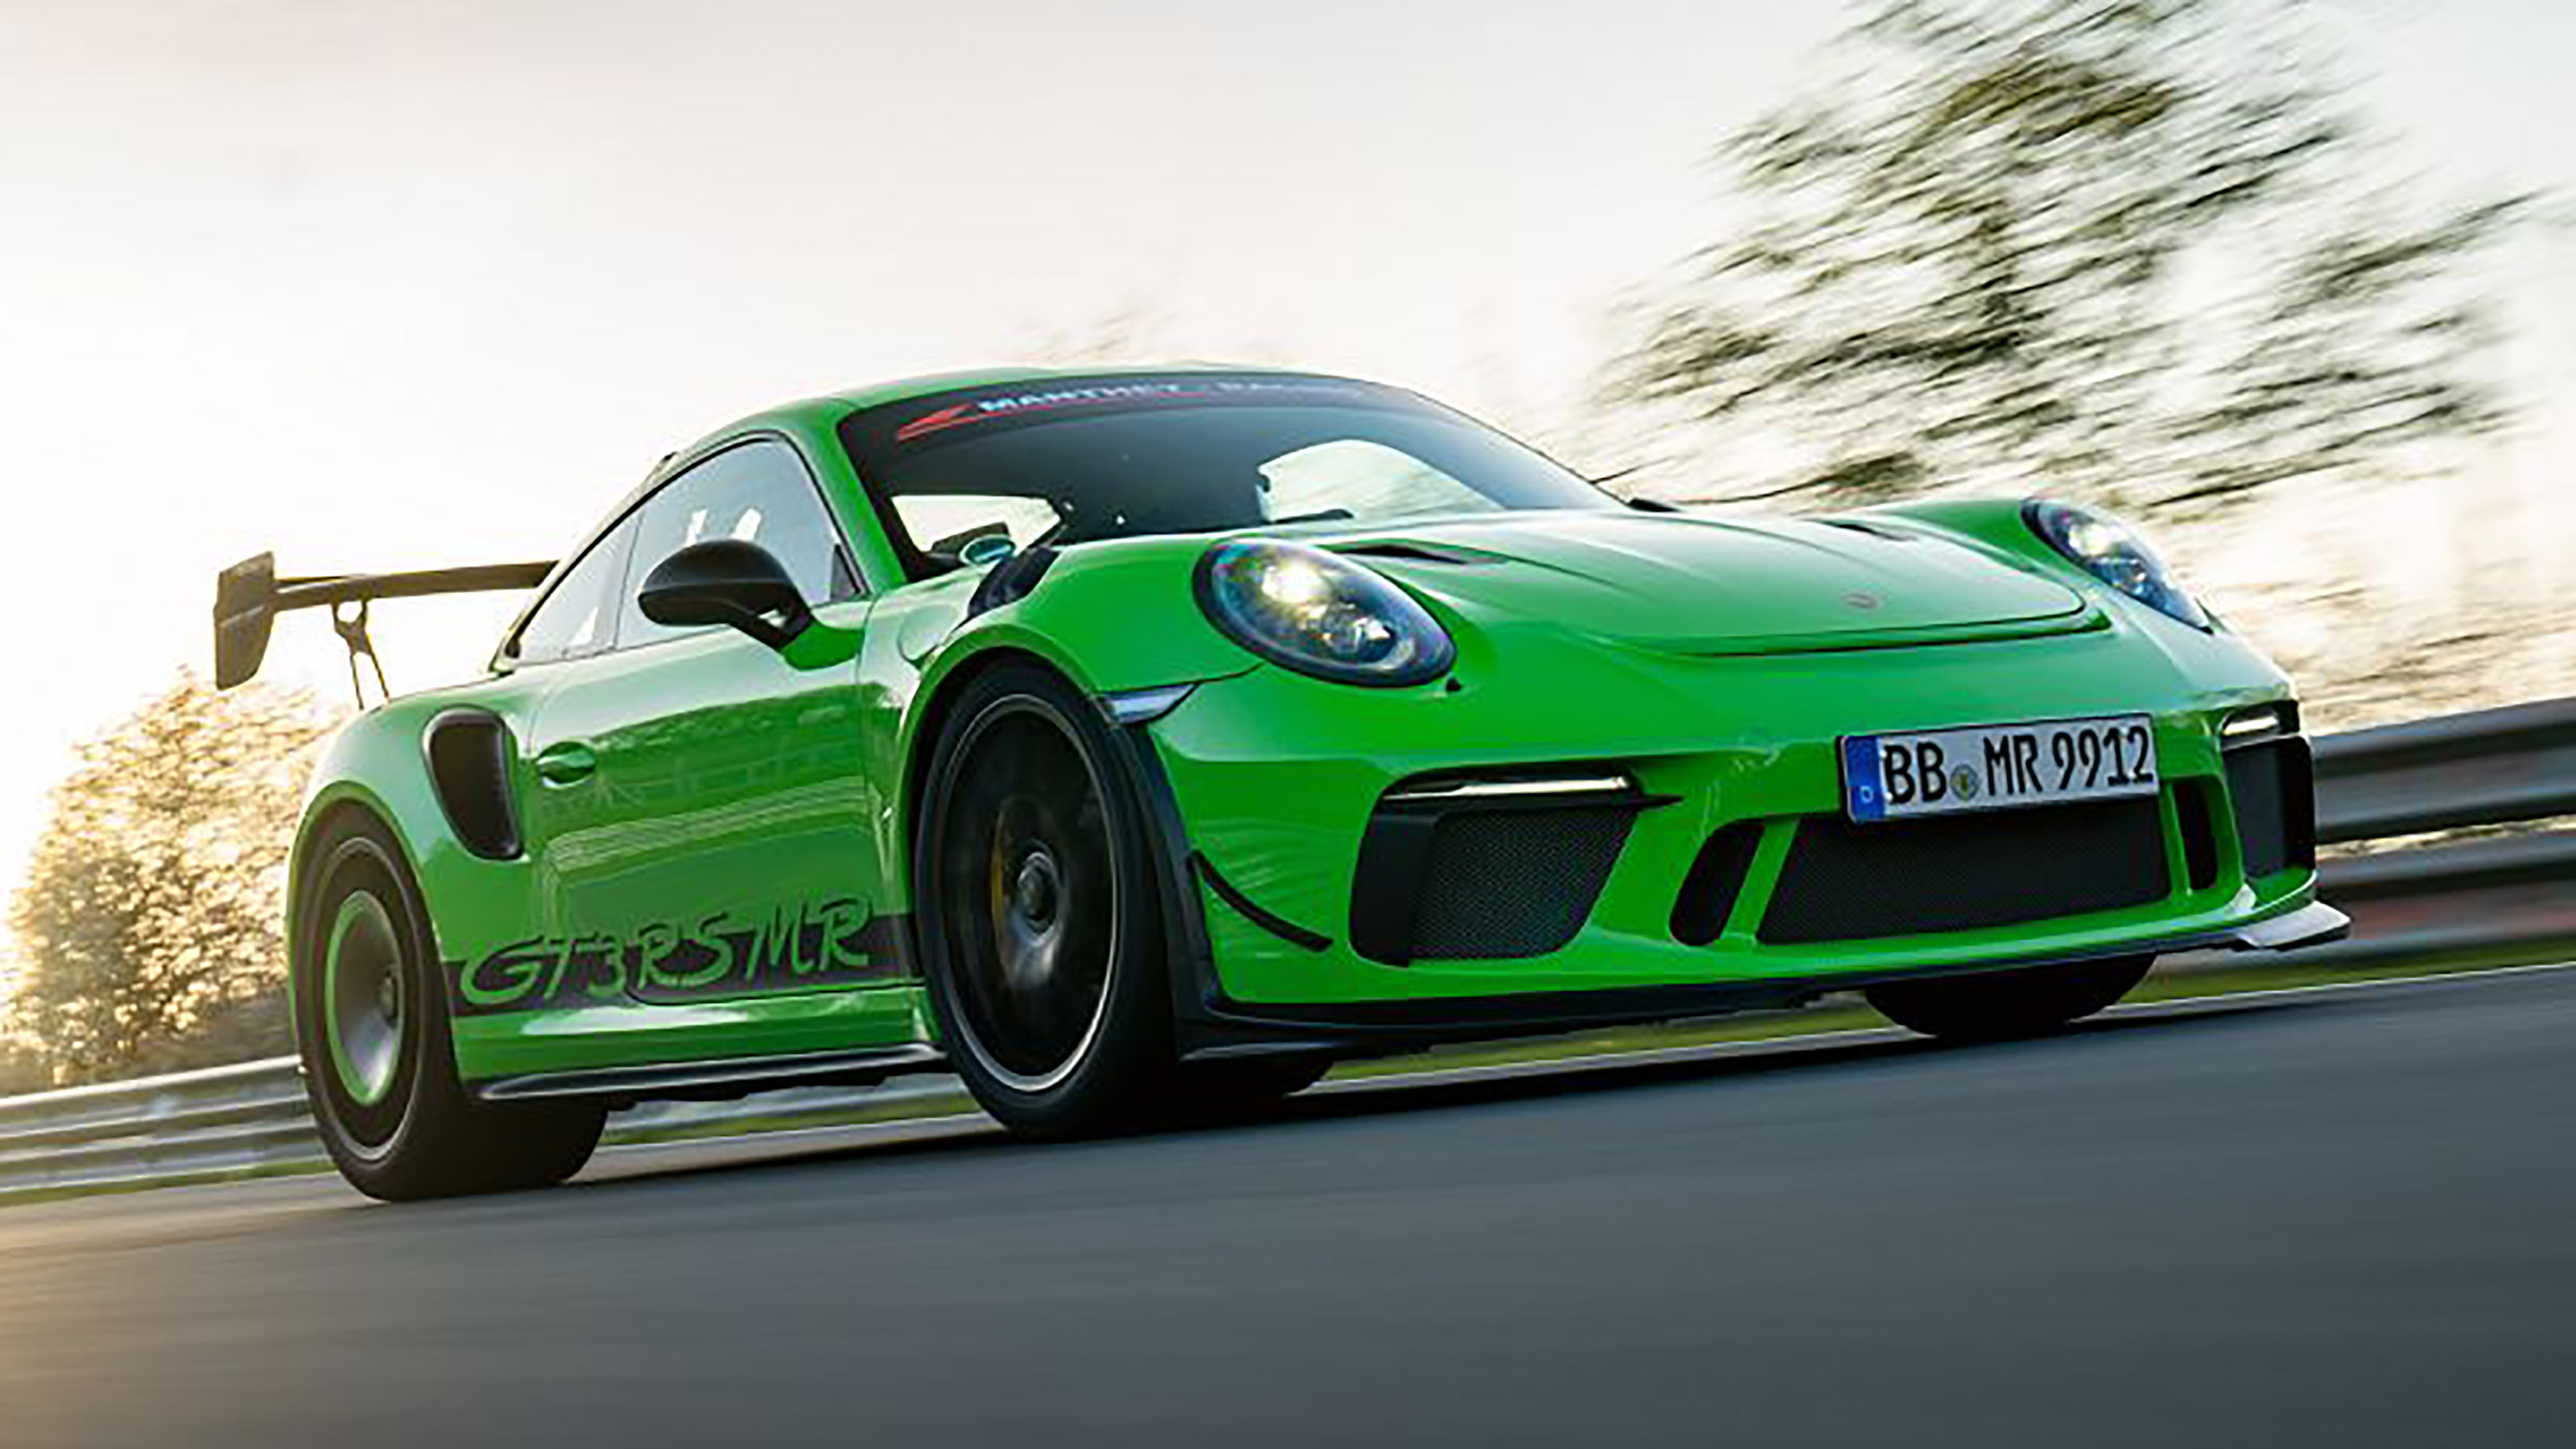 Manthey Racing's Porsche 911 GT3 RS laps the Nürburgring on video | evo